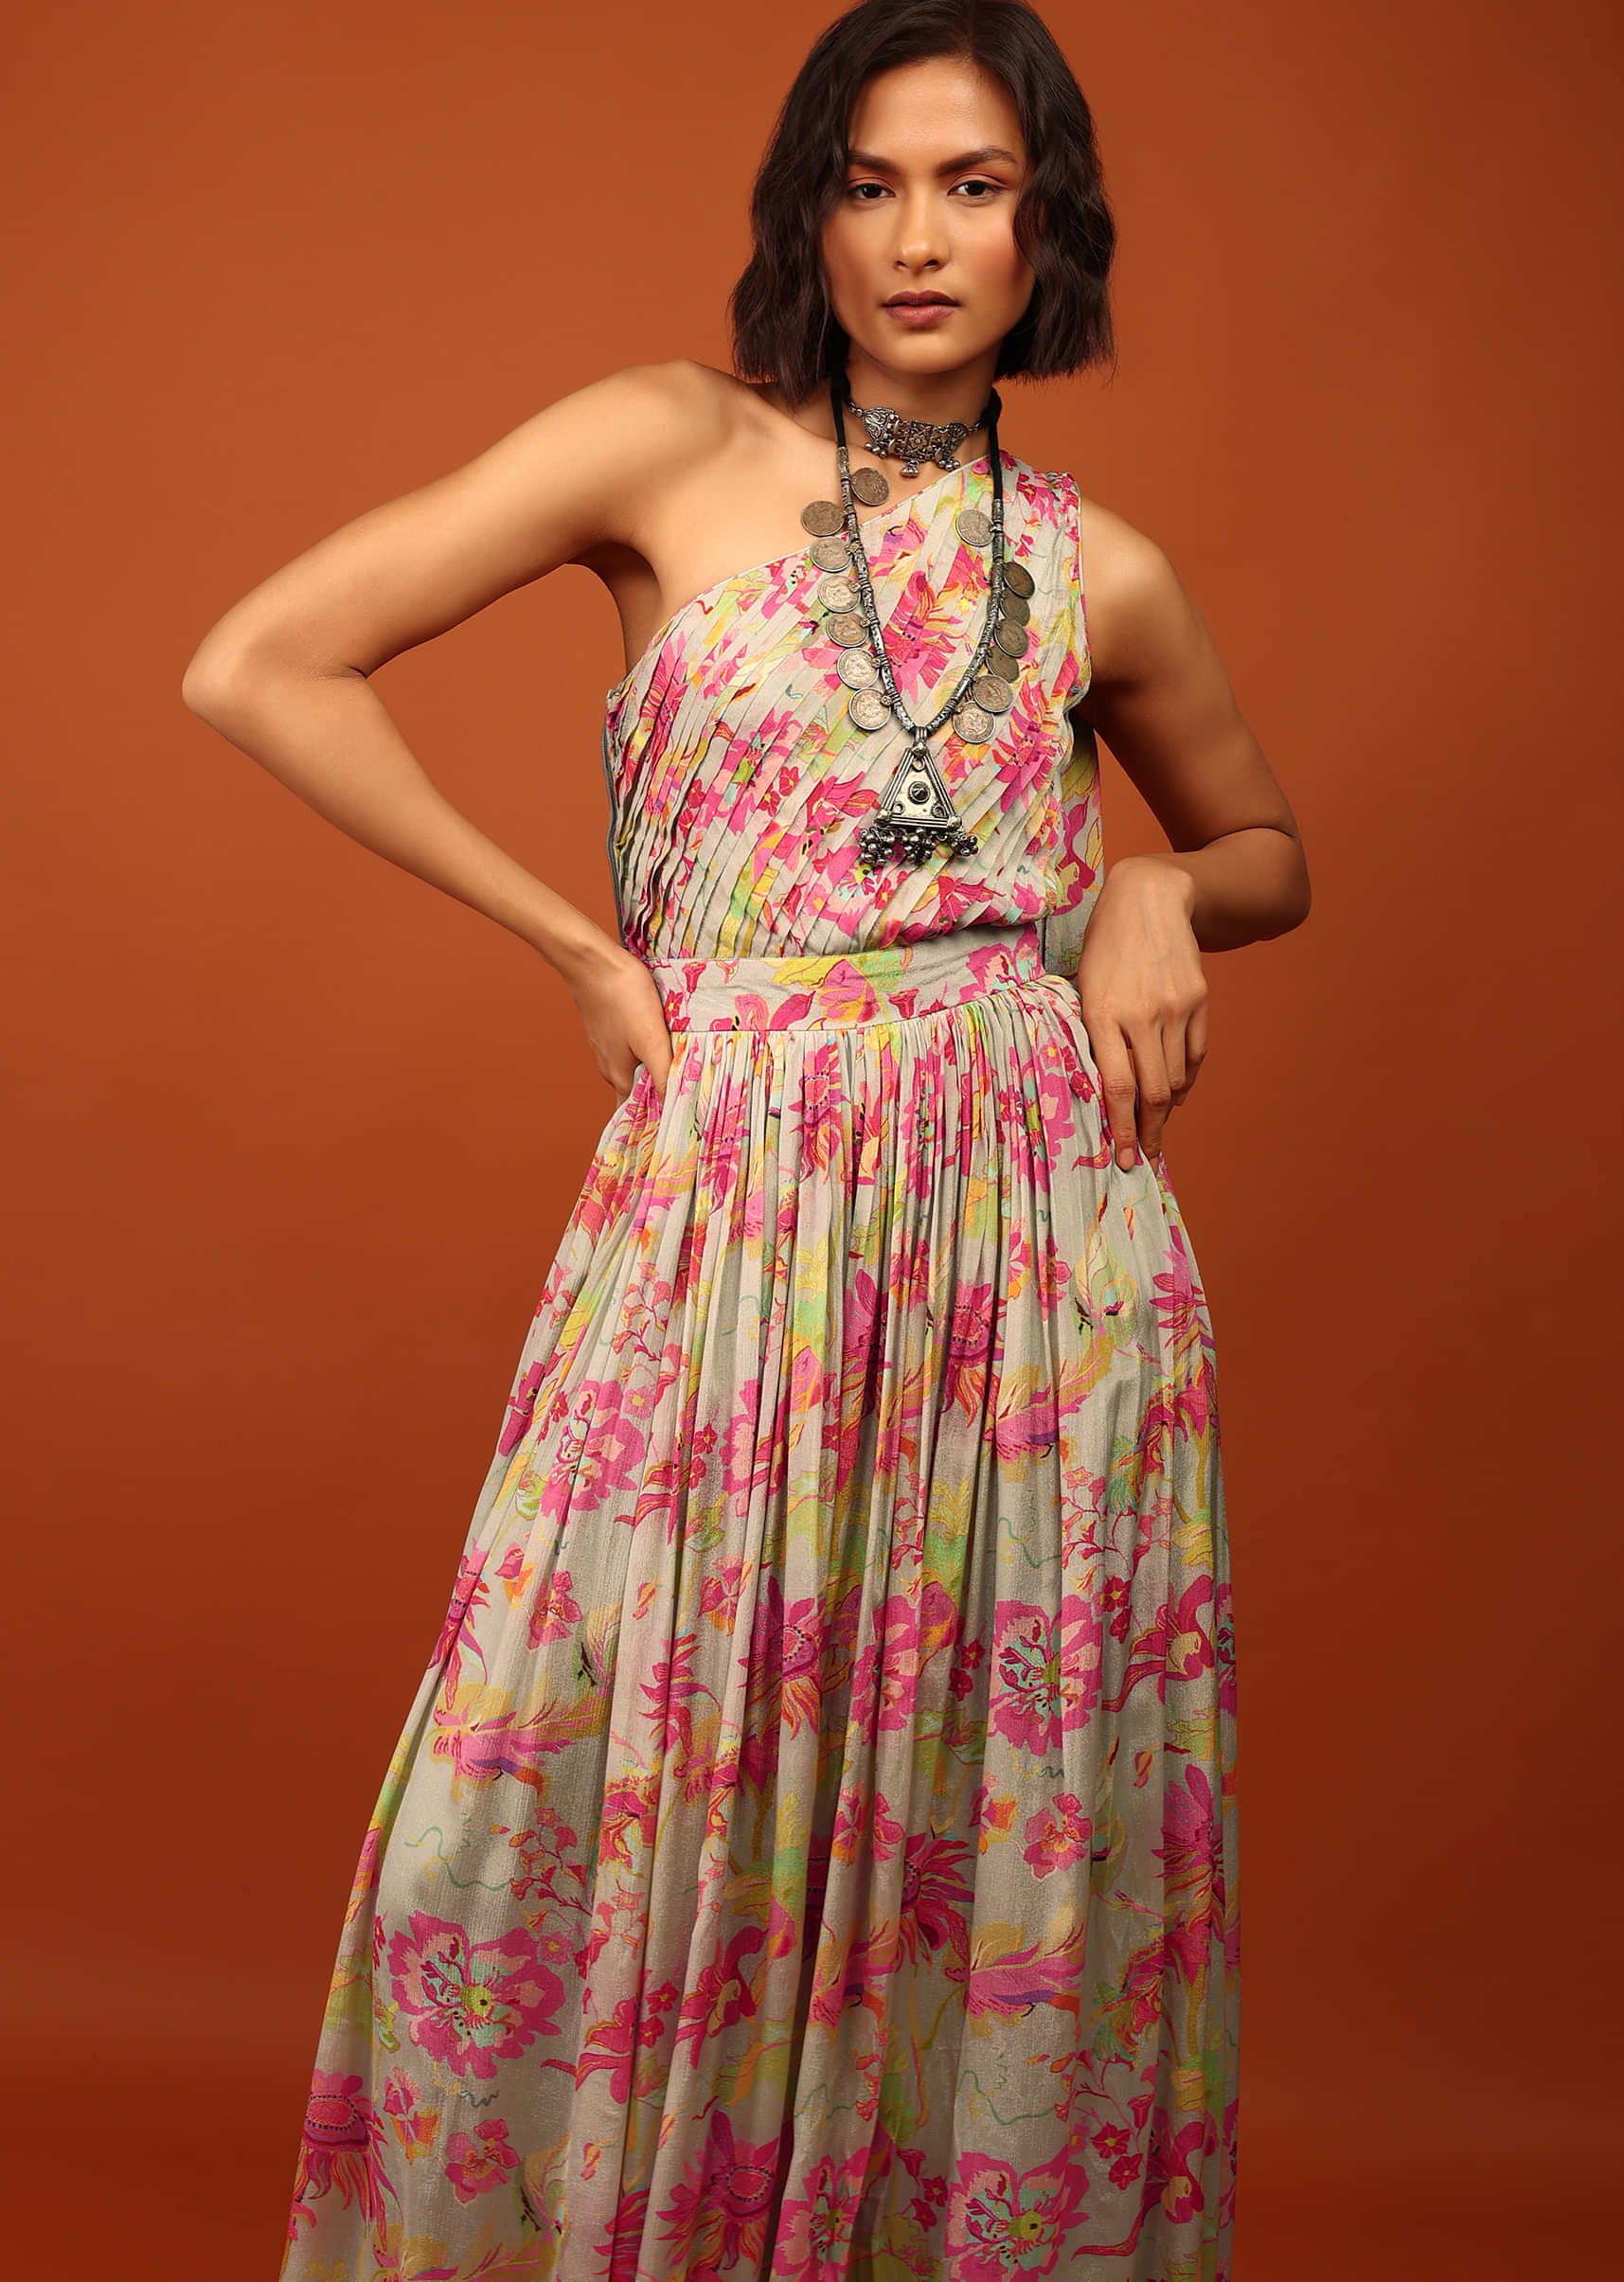 Moss Floral Print Jumpsuit With Slantly Pleated Bodice And Attached Drape On The Shoulder